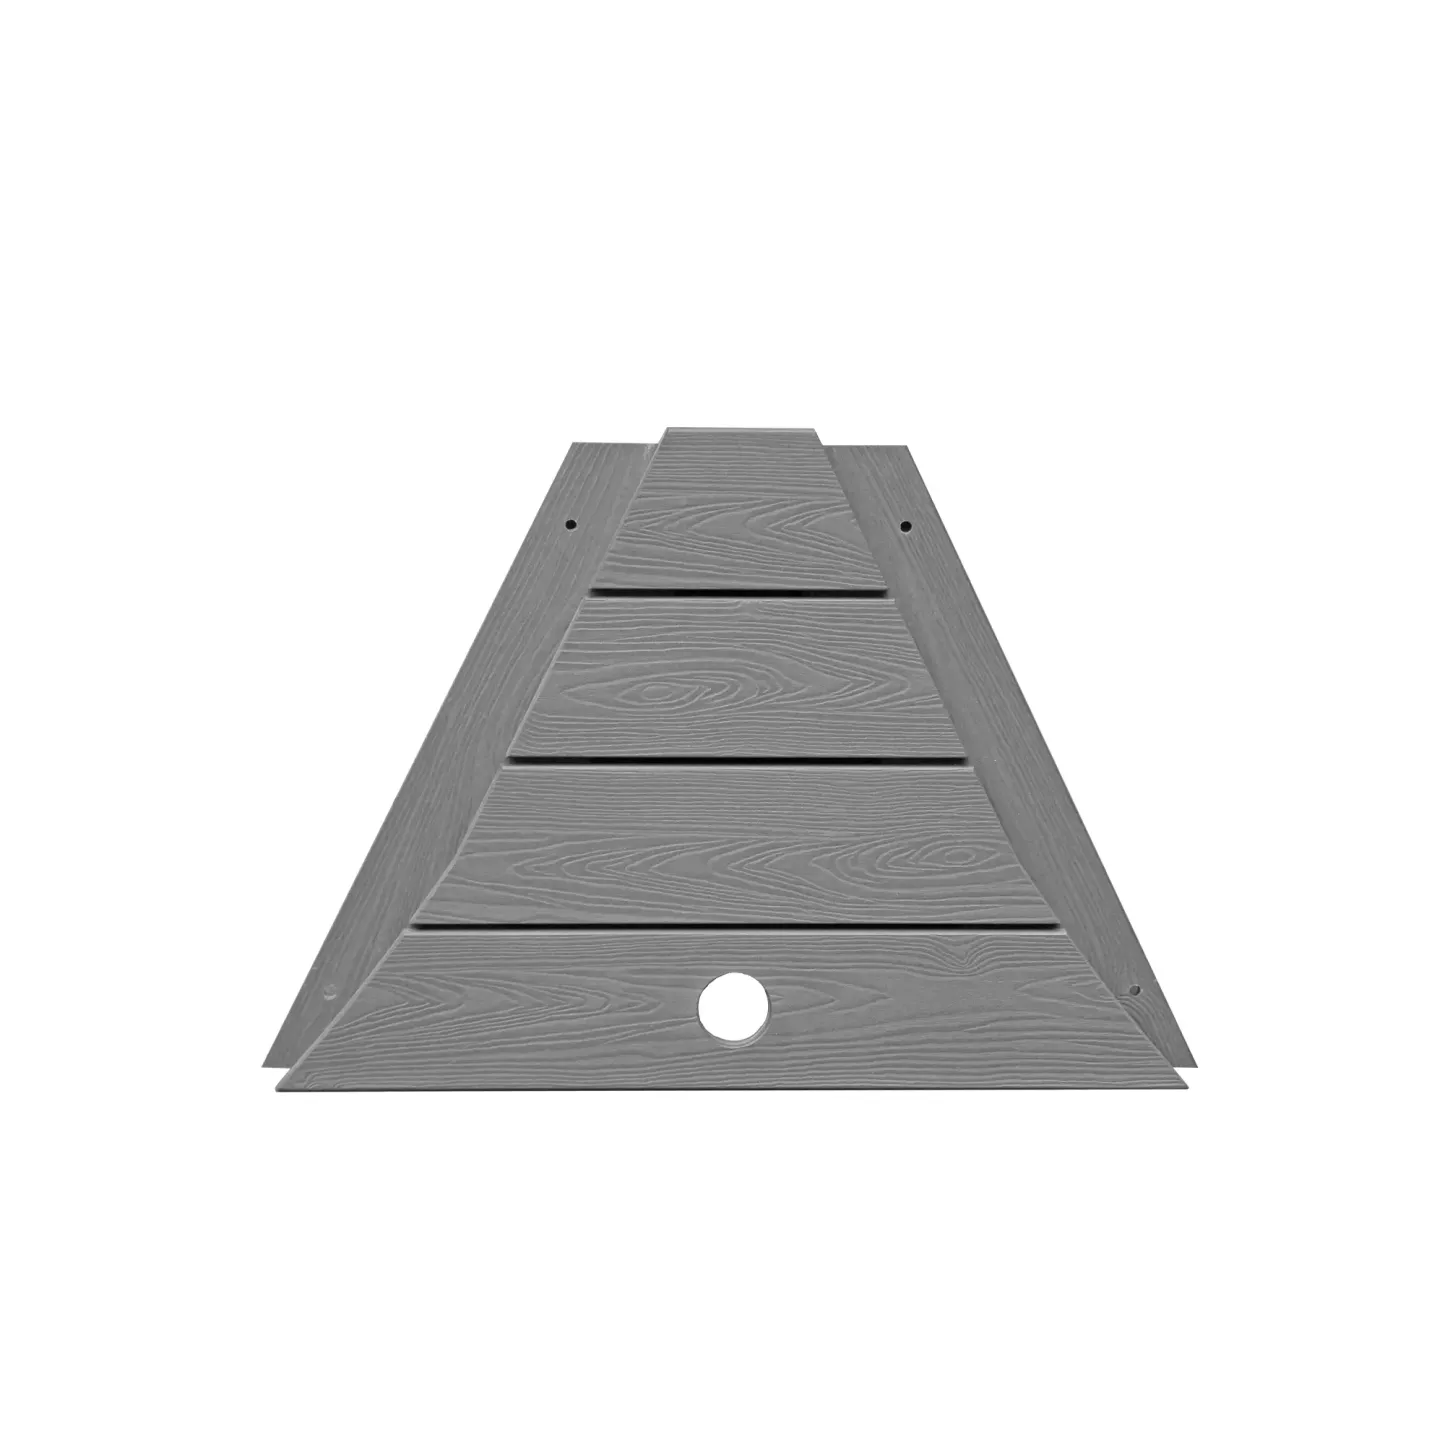 Connecting Tray with 2 inch Umbrella Holder for Adirondack Chairs Set